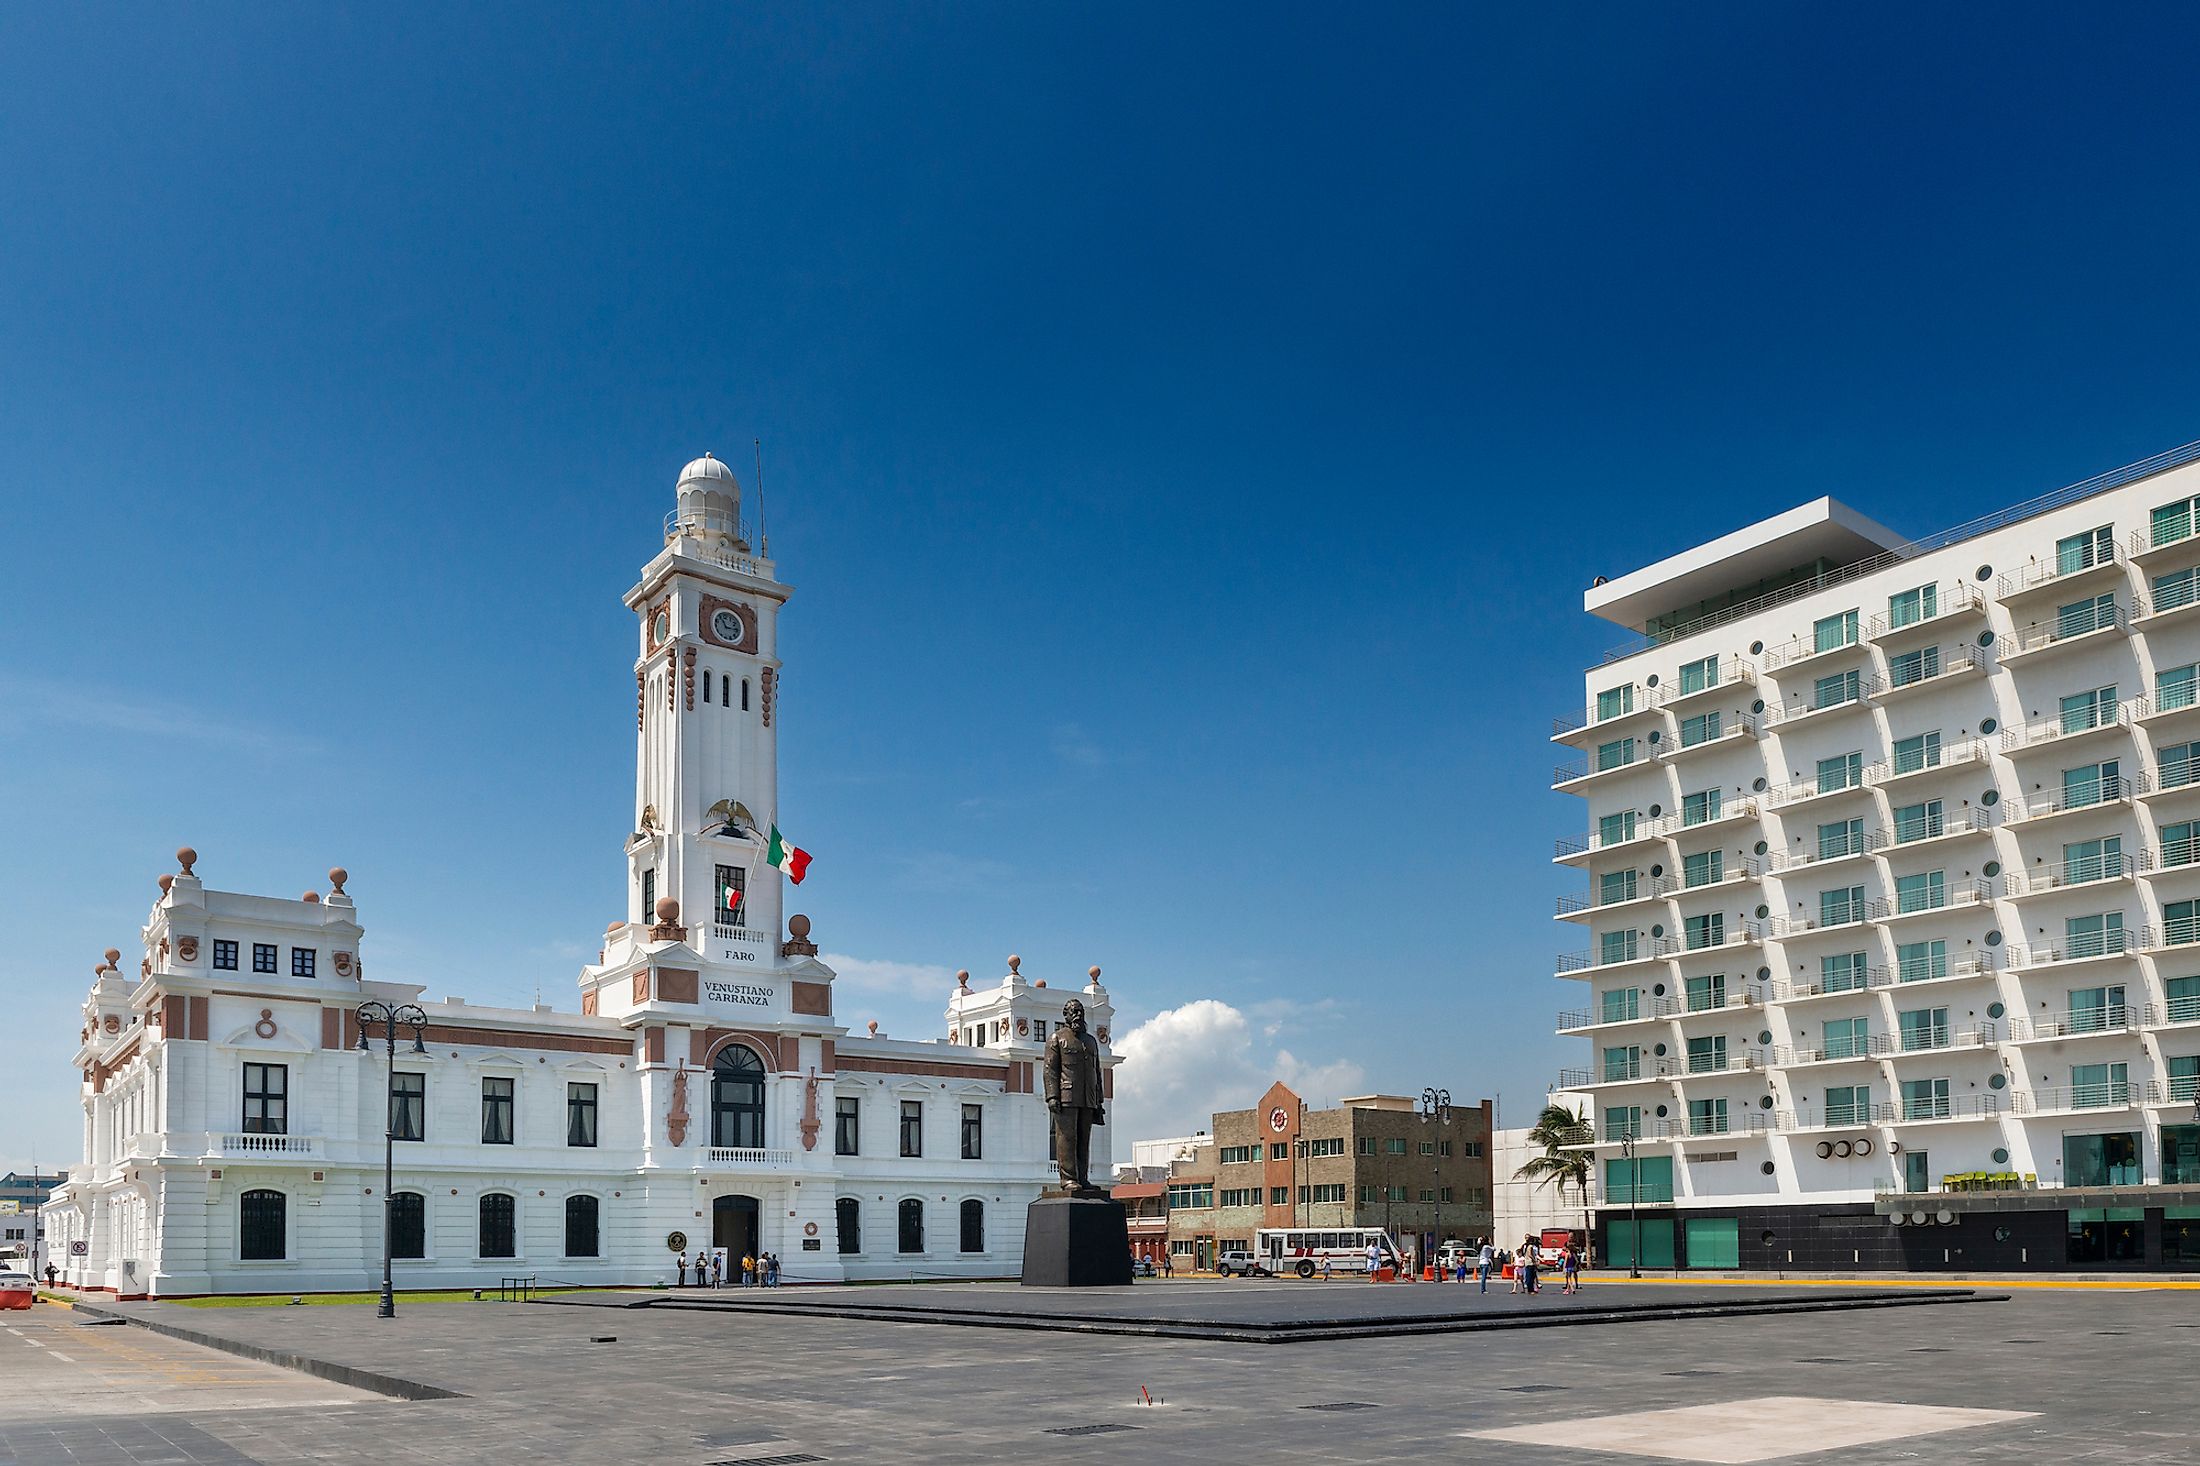 View of the Carranza Lighthouse (Faro Venustiano Carranza) in the city of Veracruz, Mexico. Editorial credit: TLF Images / Shutterstock.com